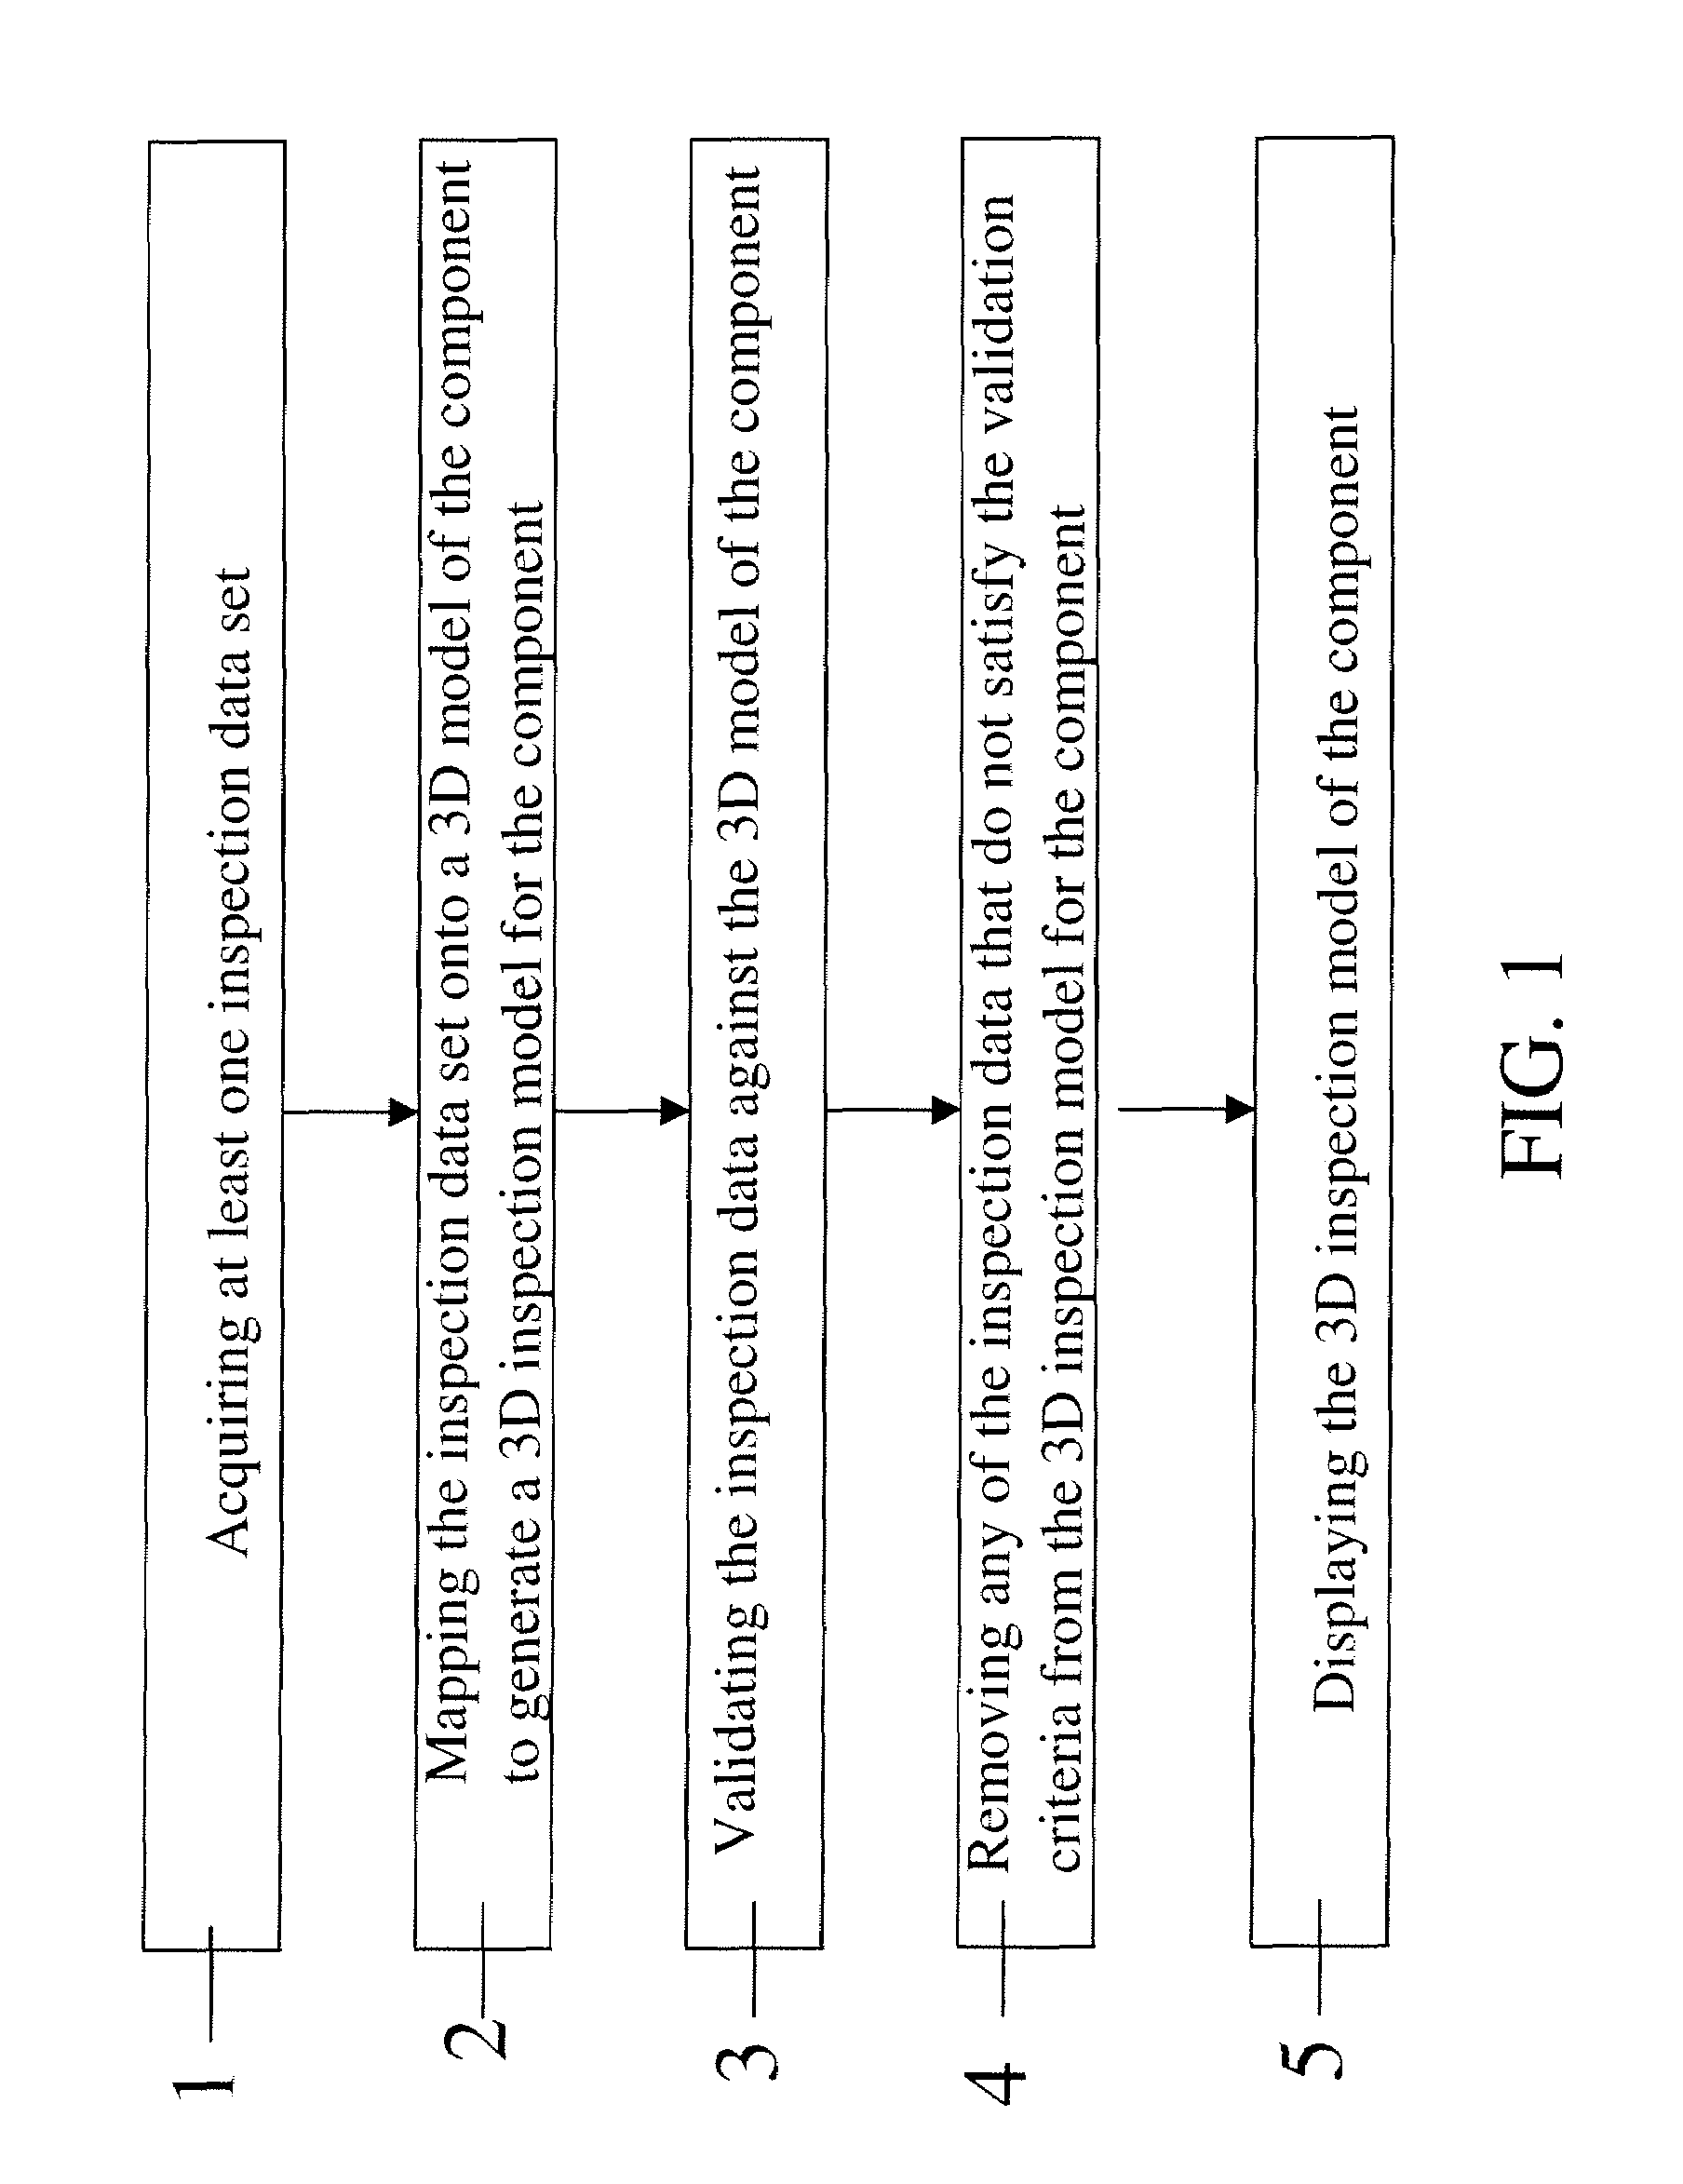 Multi-modality inspection method with data validation and data fusion